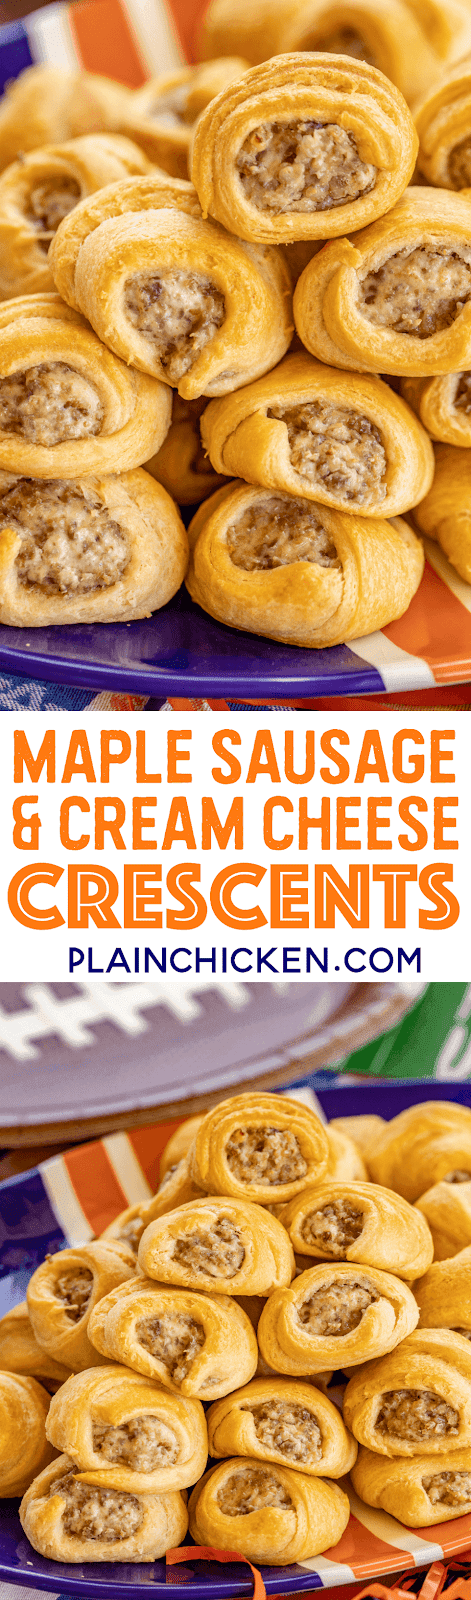 Maple Sausage and Cream Cheese Crescents - we are addicted to these things! OMG! SO good! Only 4 ingredients - sausage, cream cheese, maple and crescent rolls. Can make the filling ahead of time and refrigerate until ready to bake crescents. Great for breakfast, lunch, dinner, parties and tailgating!!! I always double the recipe because these never last long! YUM! #partyfood #breakfast #crescentrolls #maple #sausage